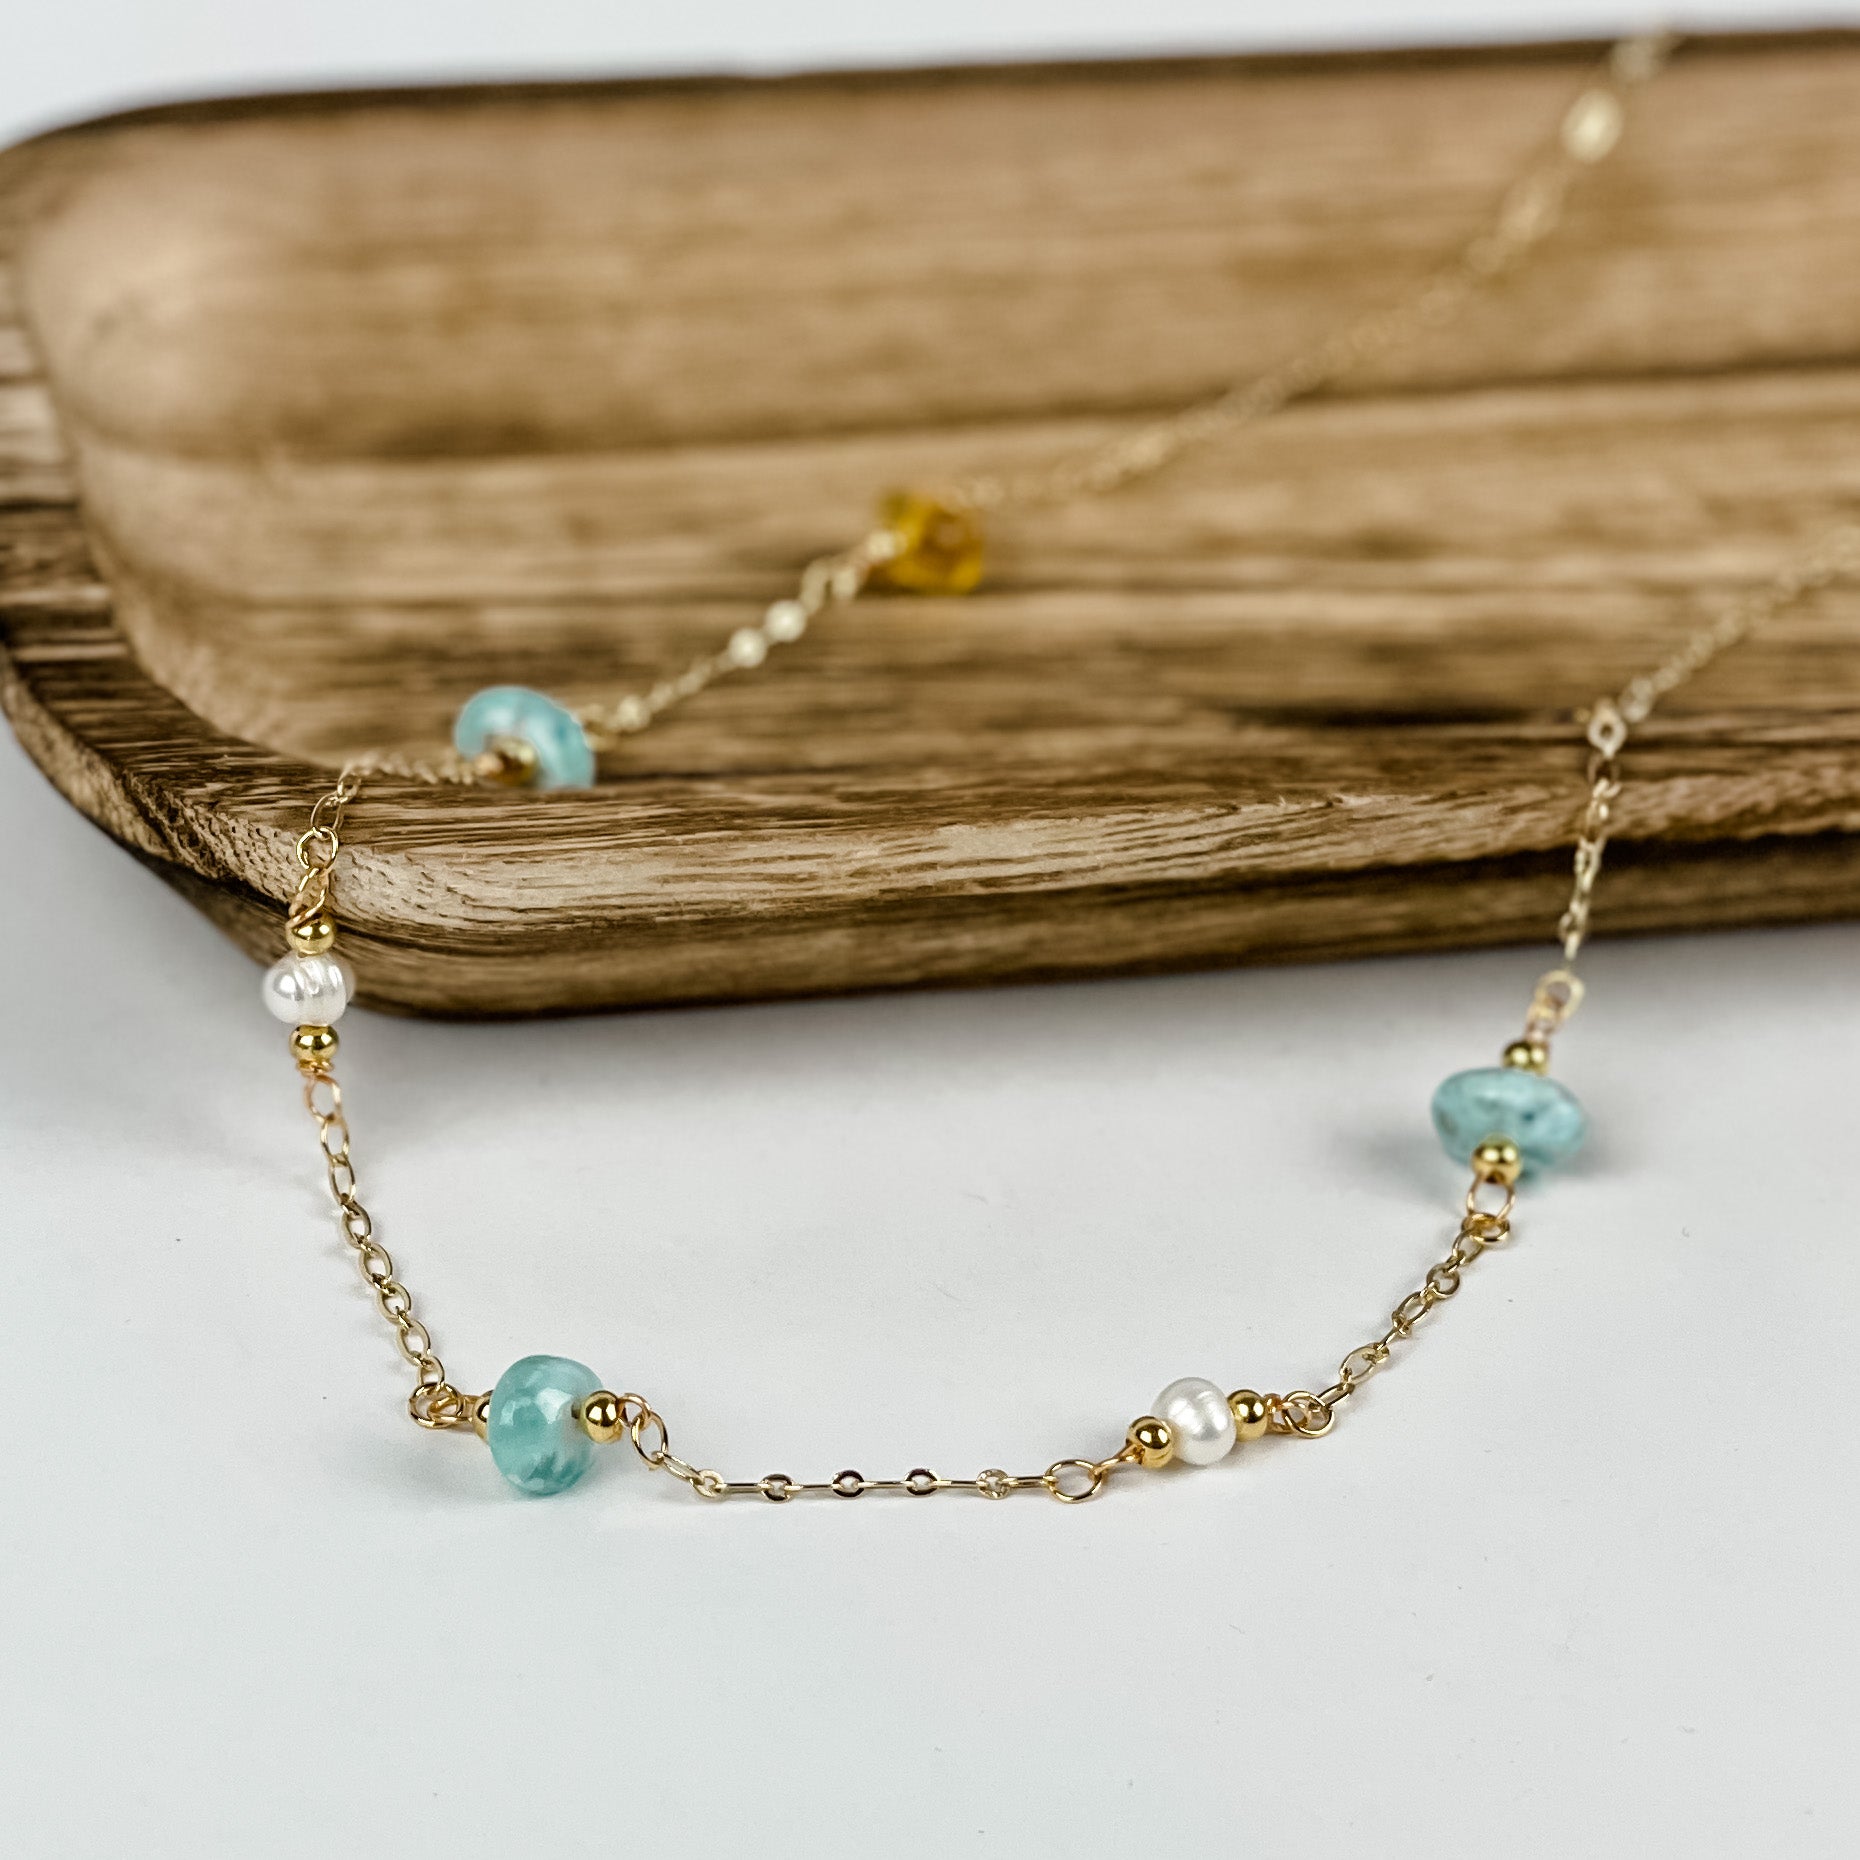 Larimar, Amber and Pearl Necklace - FMSCMarketplace.org